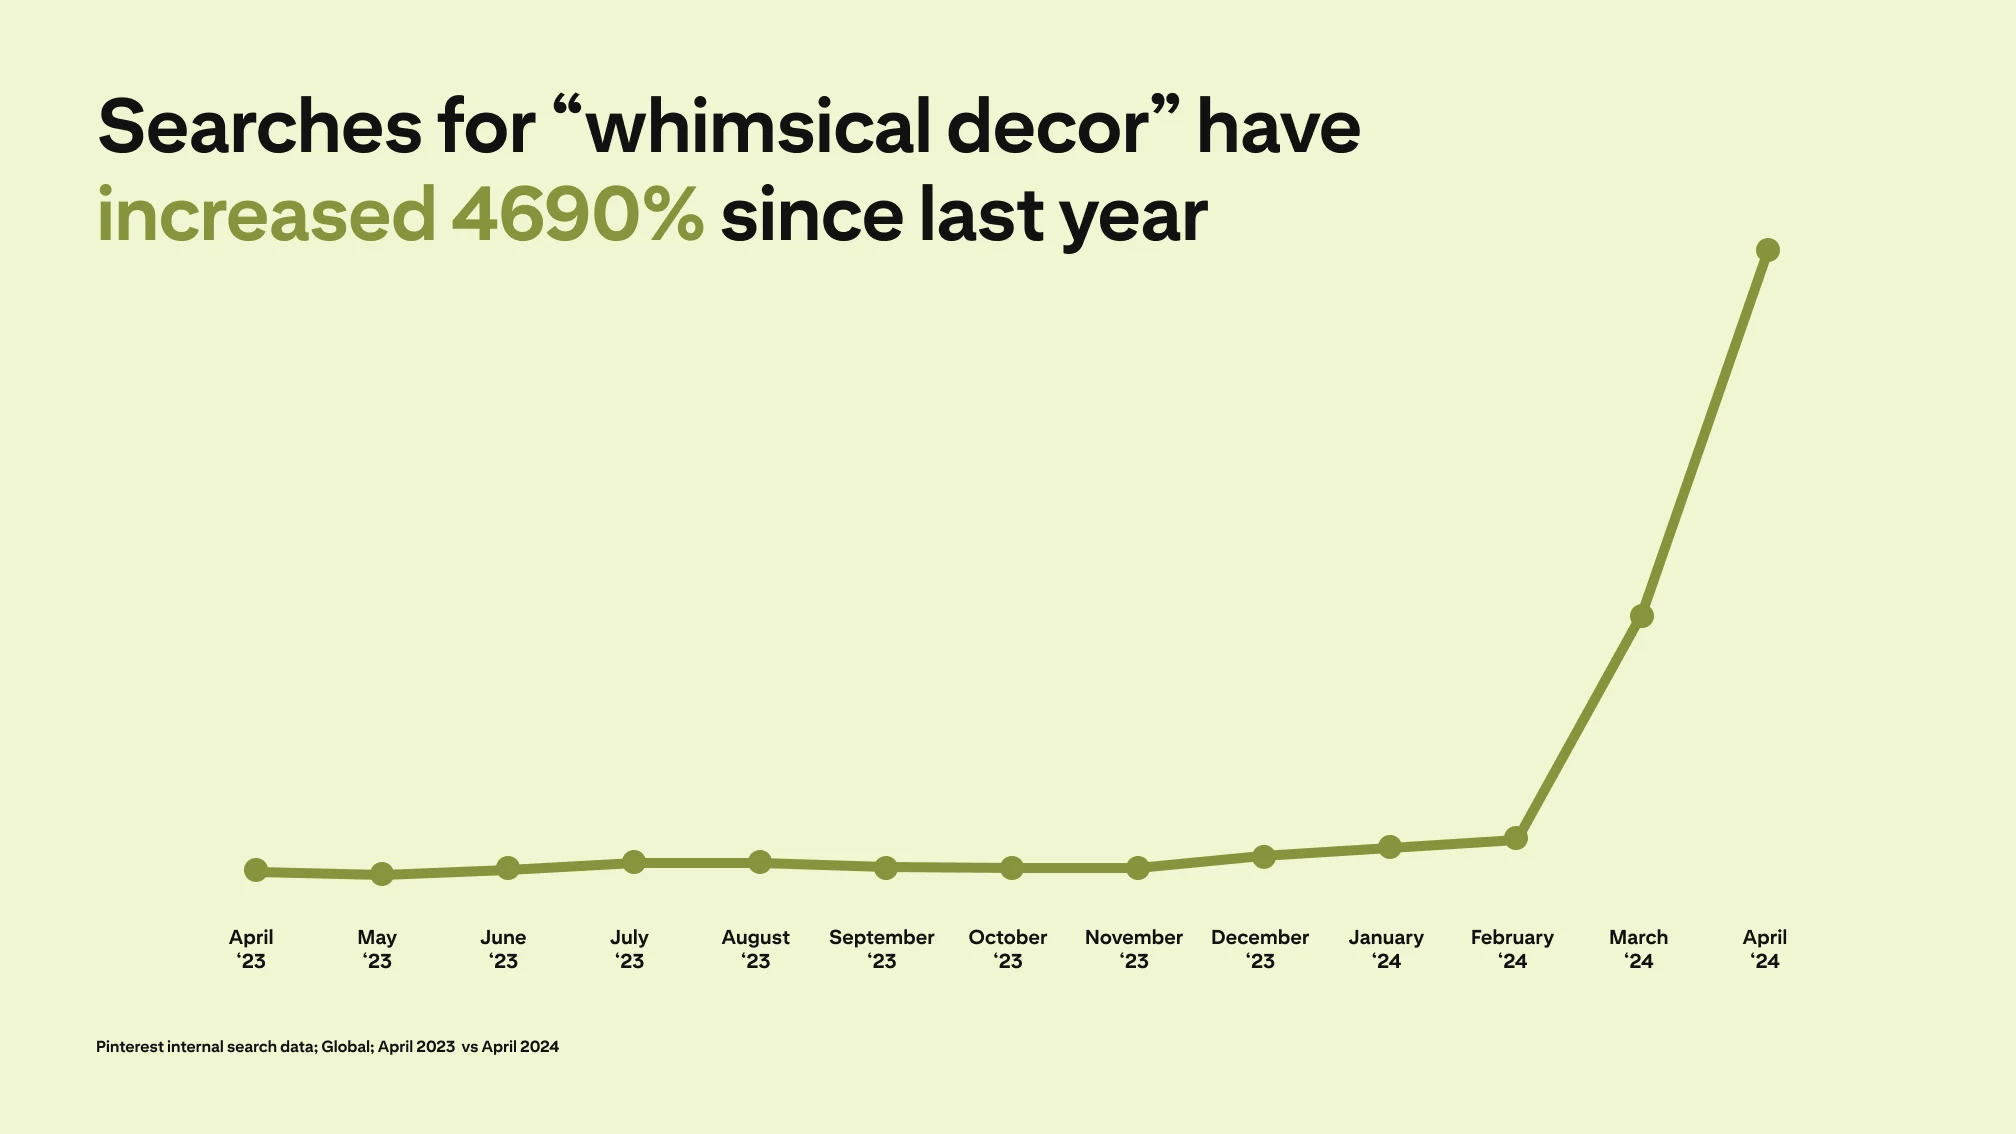 A line graph depicts searches for "whimsical decor" increasing 4690% since last year